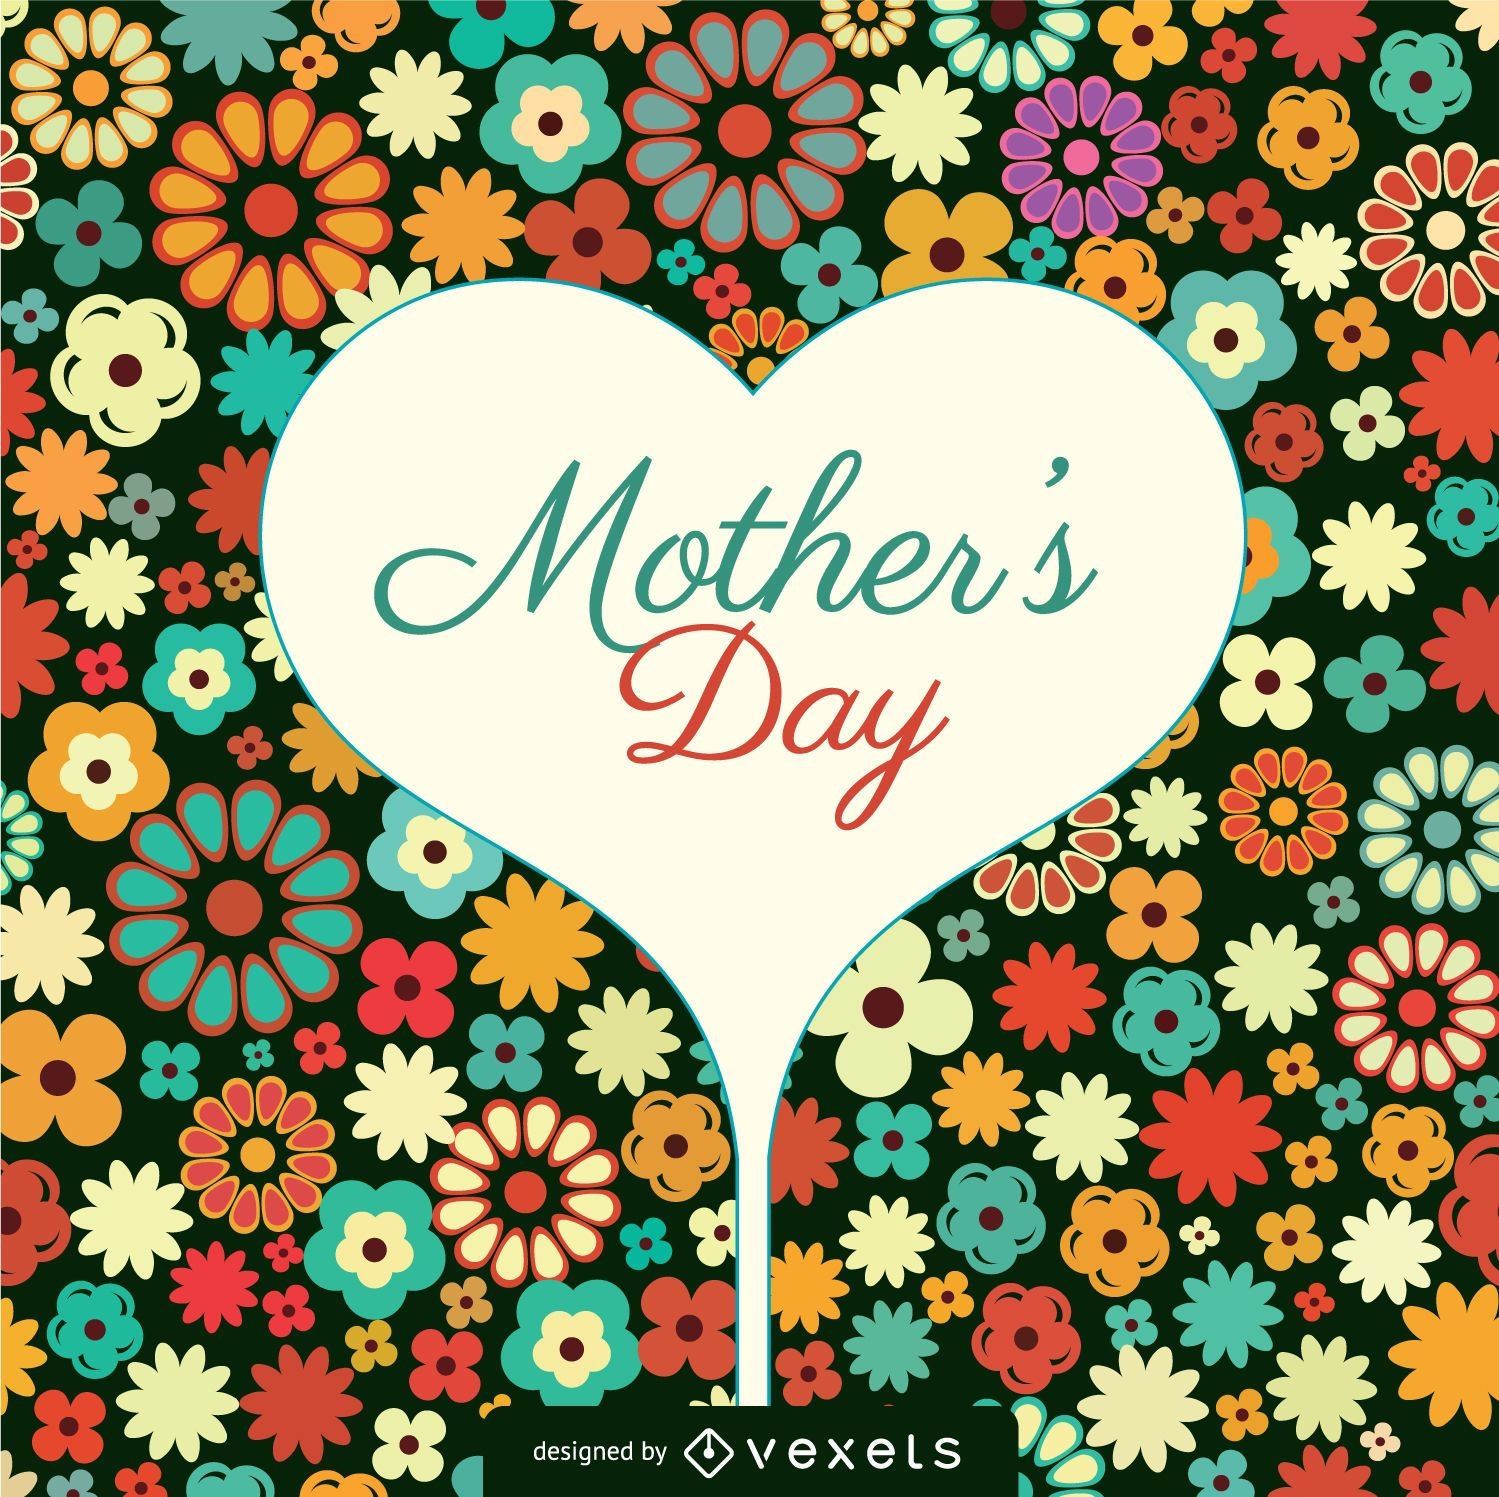 Mother?s Day flowers card